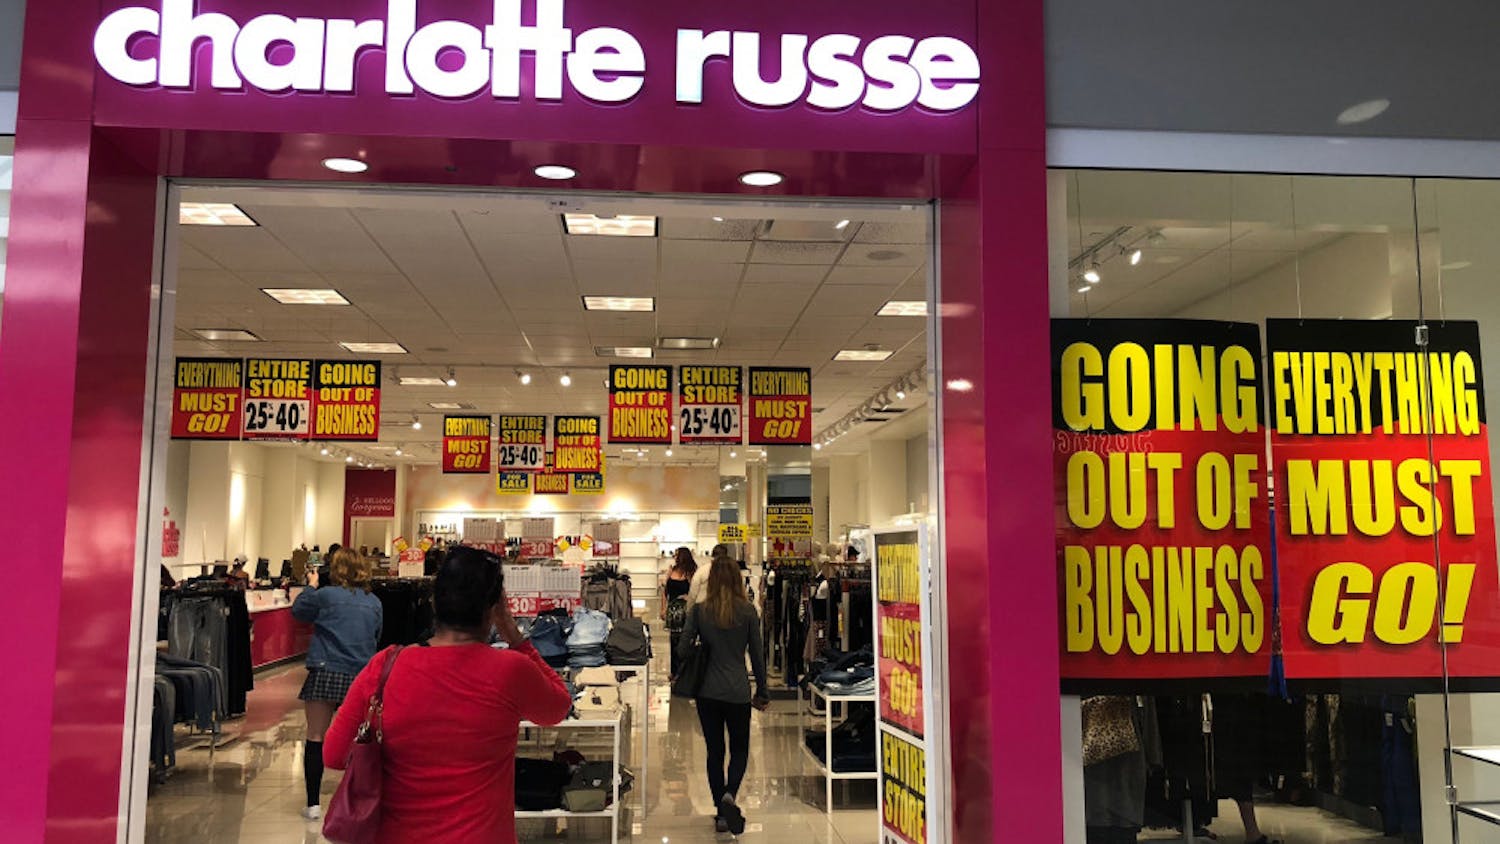 Charlotte Russe, located at 6345 W Newberry Rd. in the Oaks Mall, will close as the company faces bankruptcy. The store will be having a closing sale of 25-40 percent off until all products are sold.